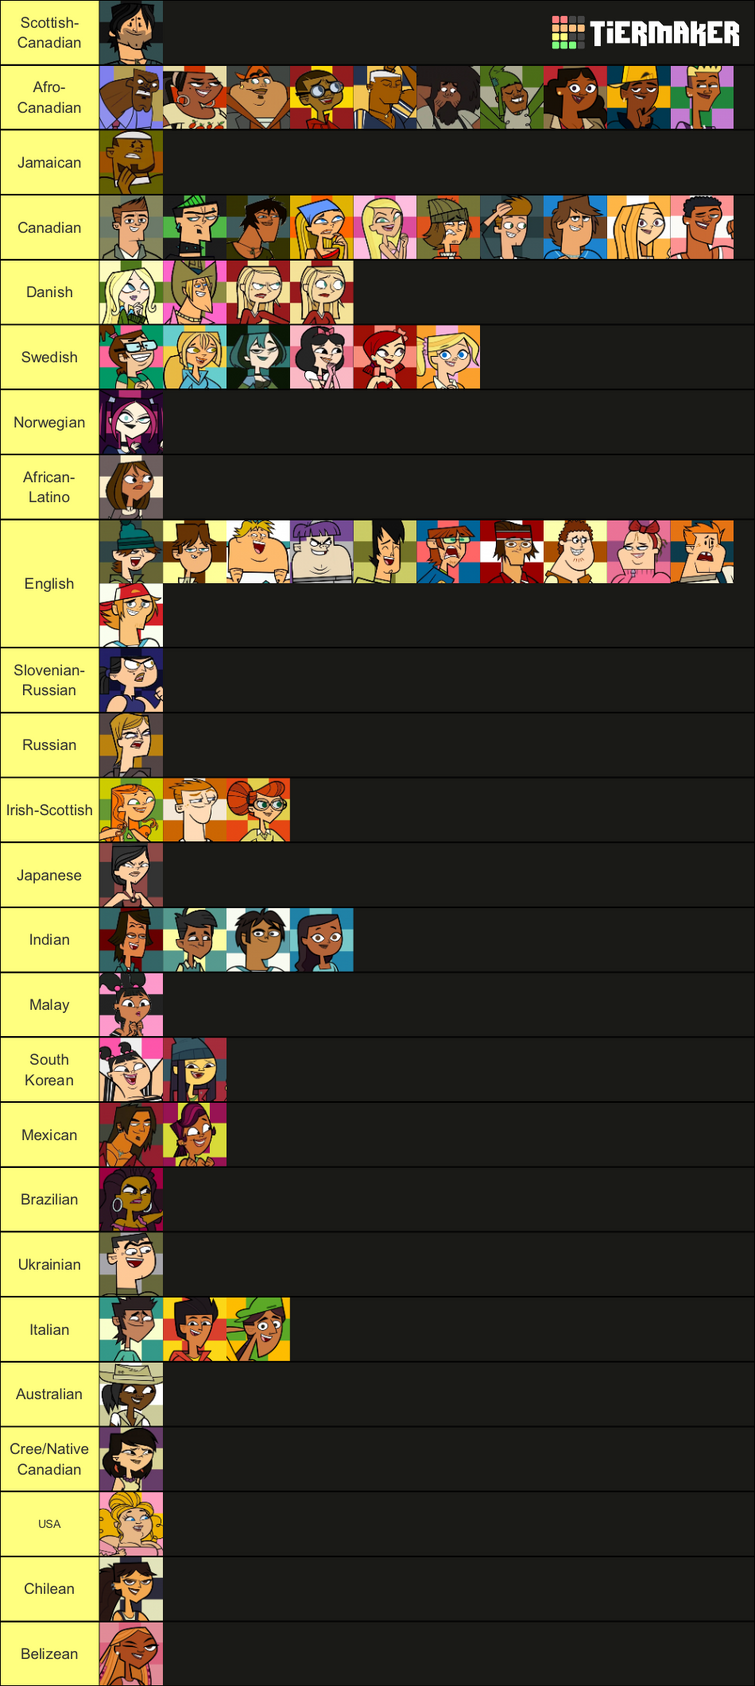 Tier list : May or may not be accurate.